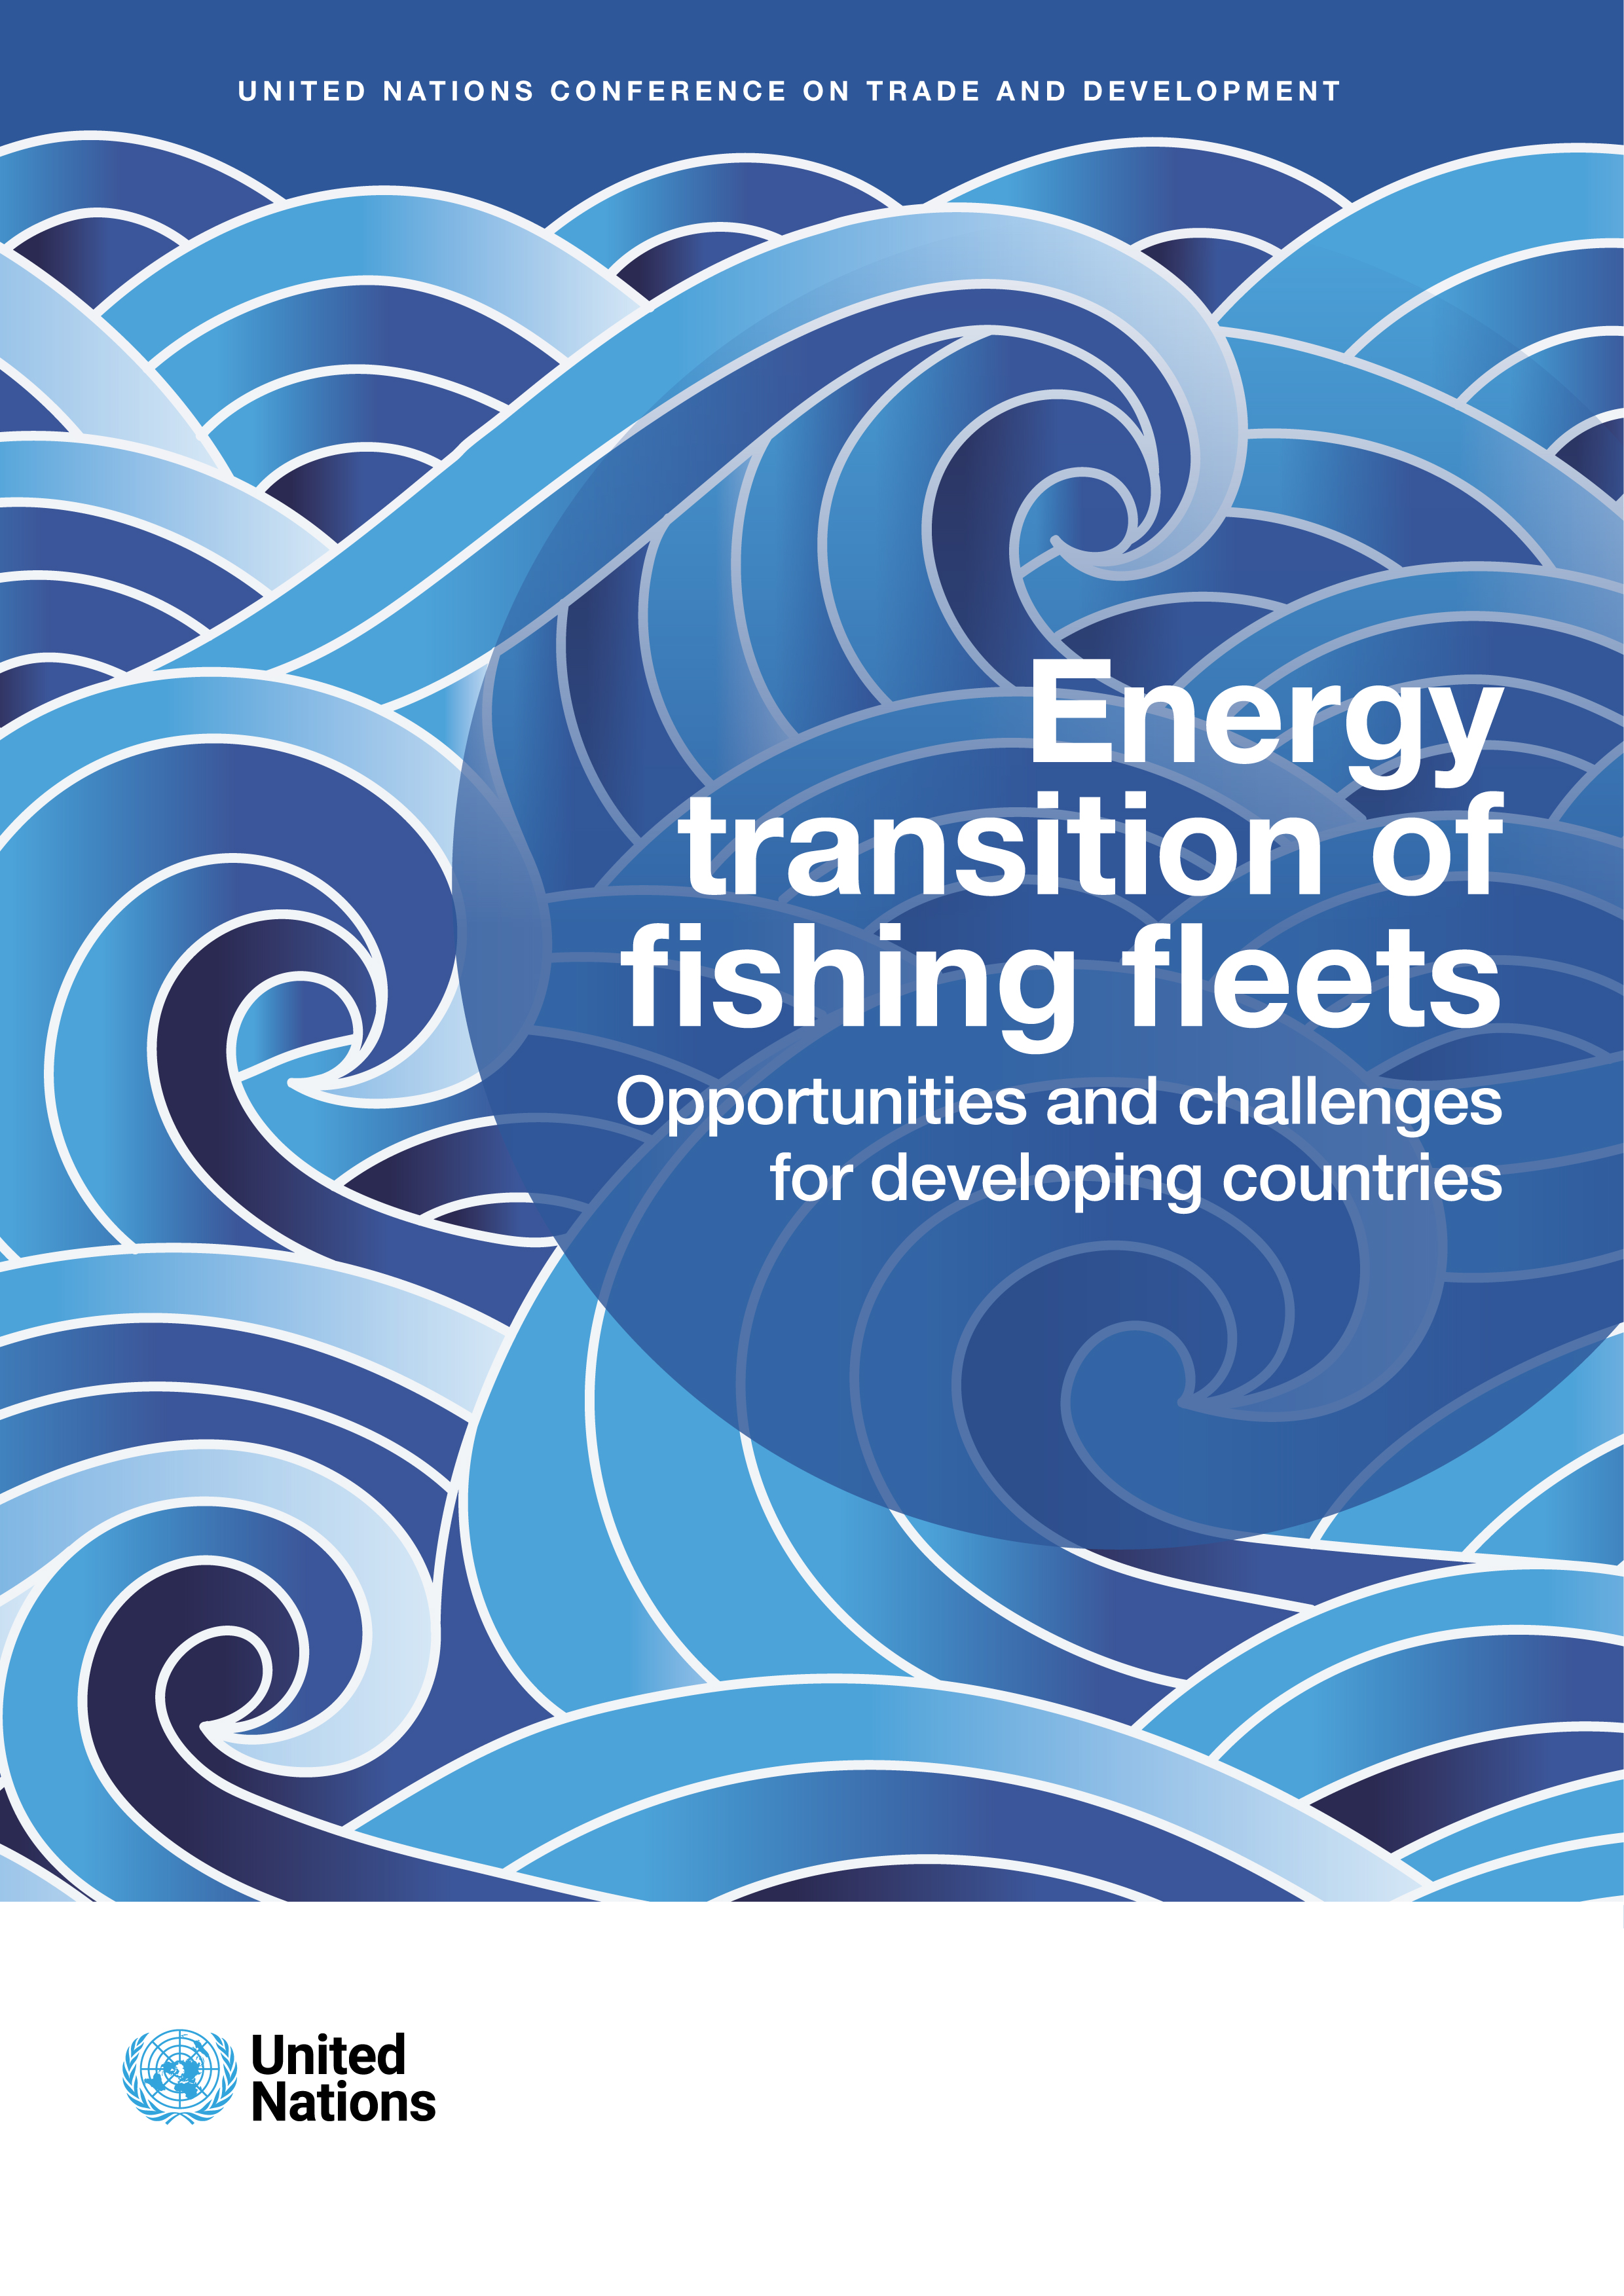 image of Opportunities, challenges and considerations for the transition of fishing fleets